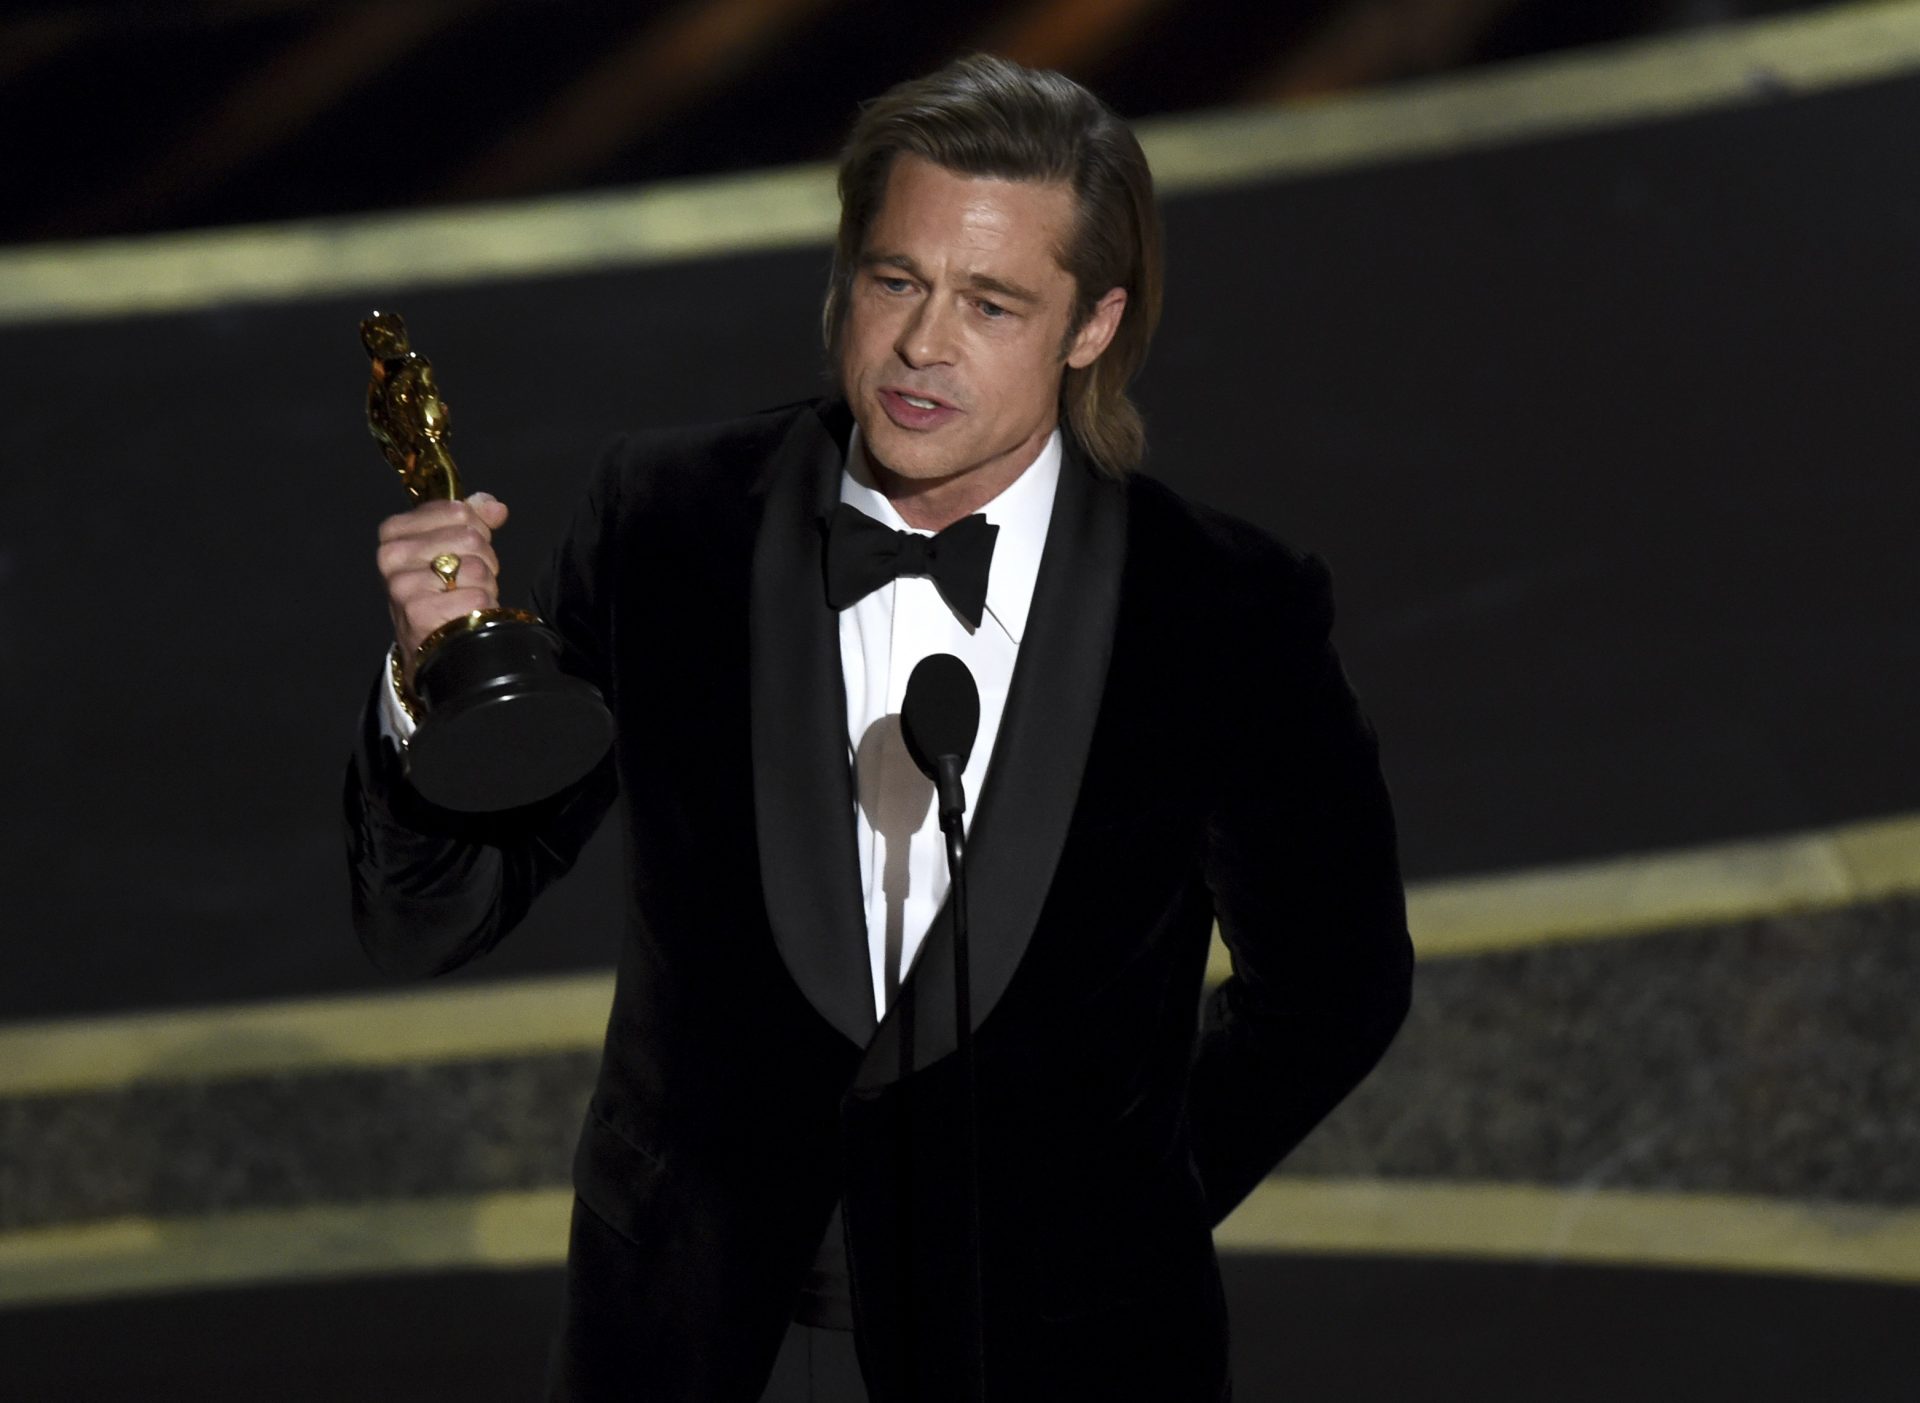 Brad Pitt accepts the award for best performance by an actor in a supporting role for "Once Upon a Time in Hollywood" at the Oscars on Sunday, Feb. 9, 2020, at the Dolby Theatre in Los Angeles.